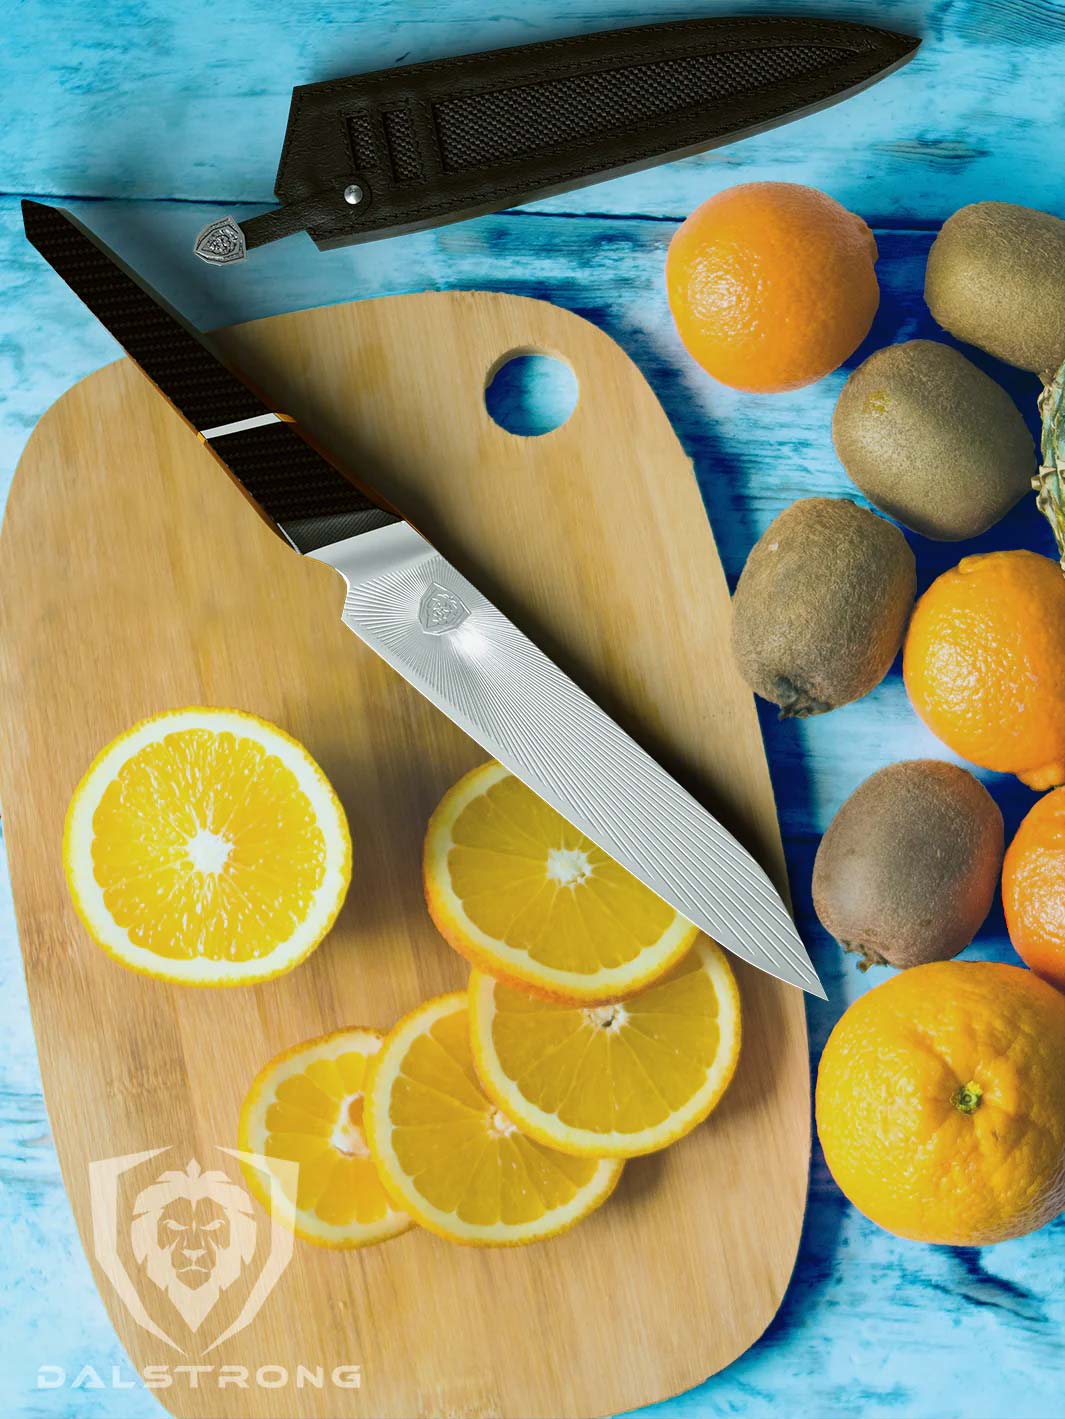 Dalstrong quantum 1 series 6 inch utility knife with dragon skin handle and black sheath beside slices of orange on a cutting board.